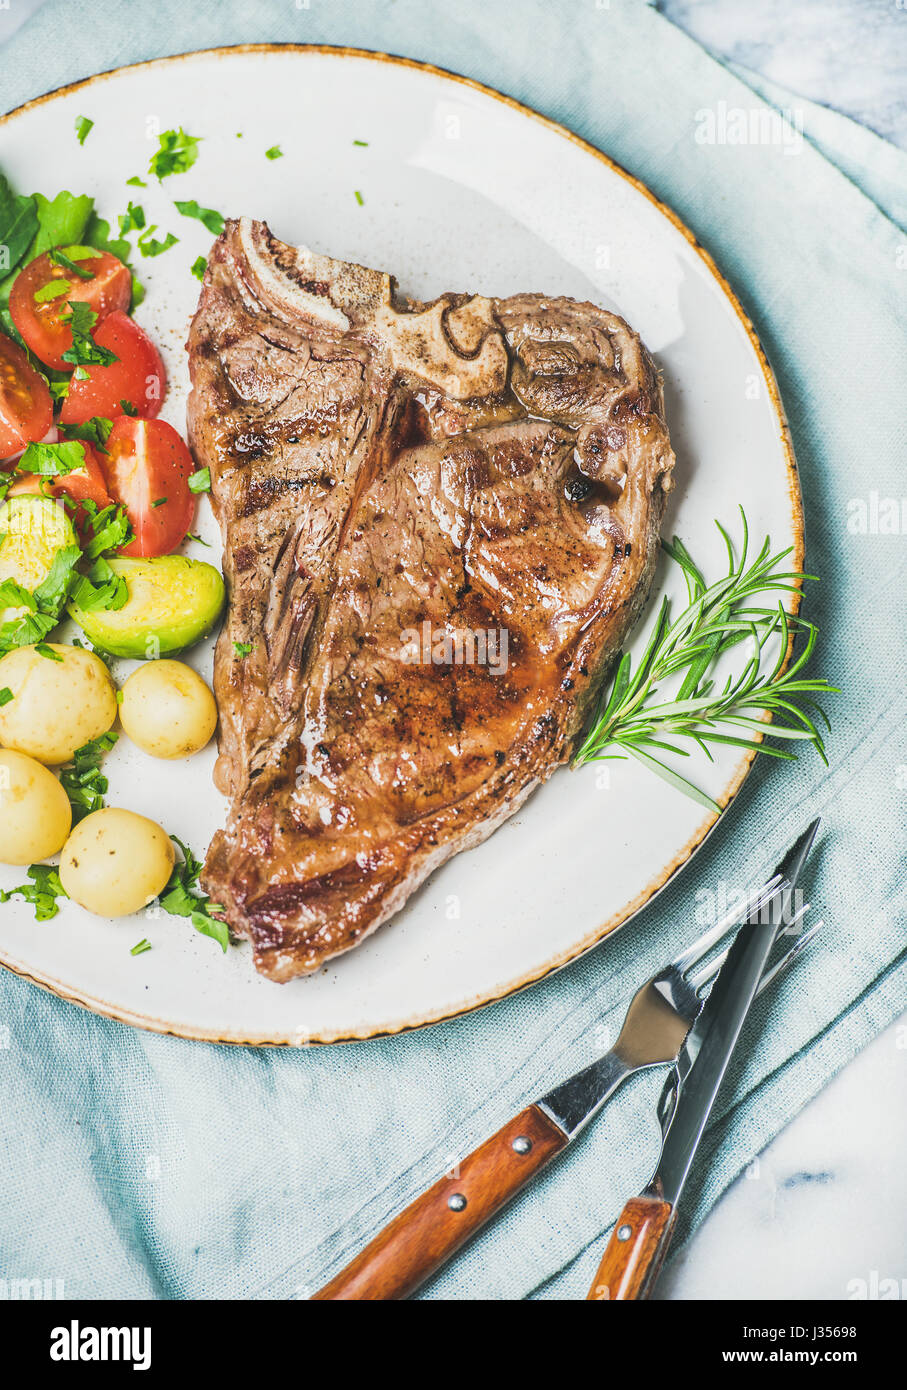 Meat dinner plate with cooked beef tbone steak Stock Photo